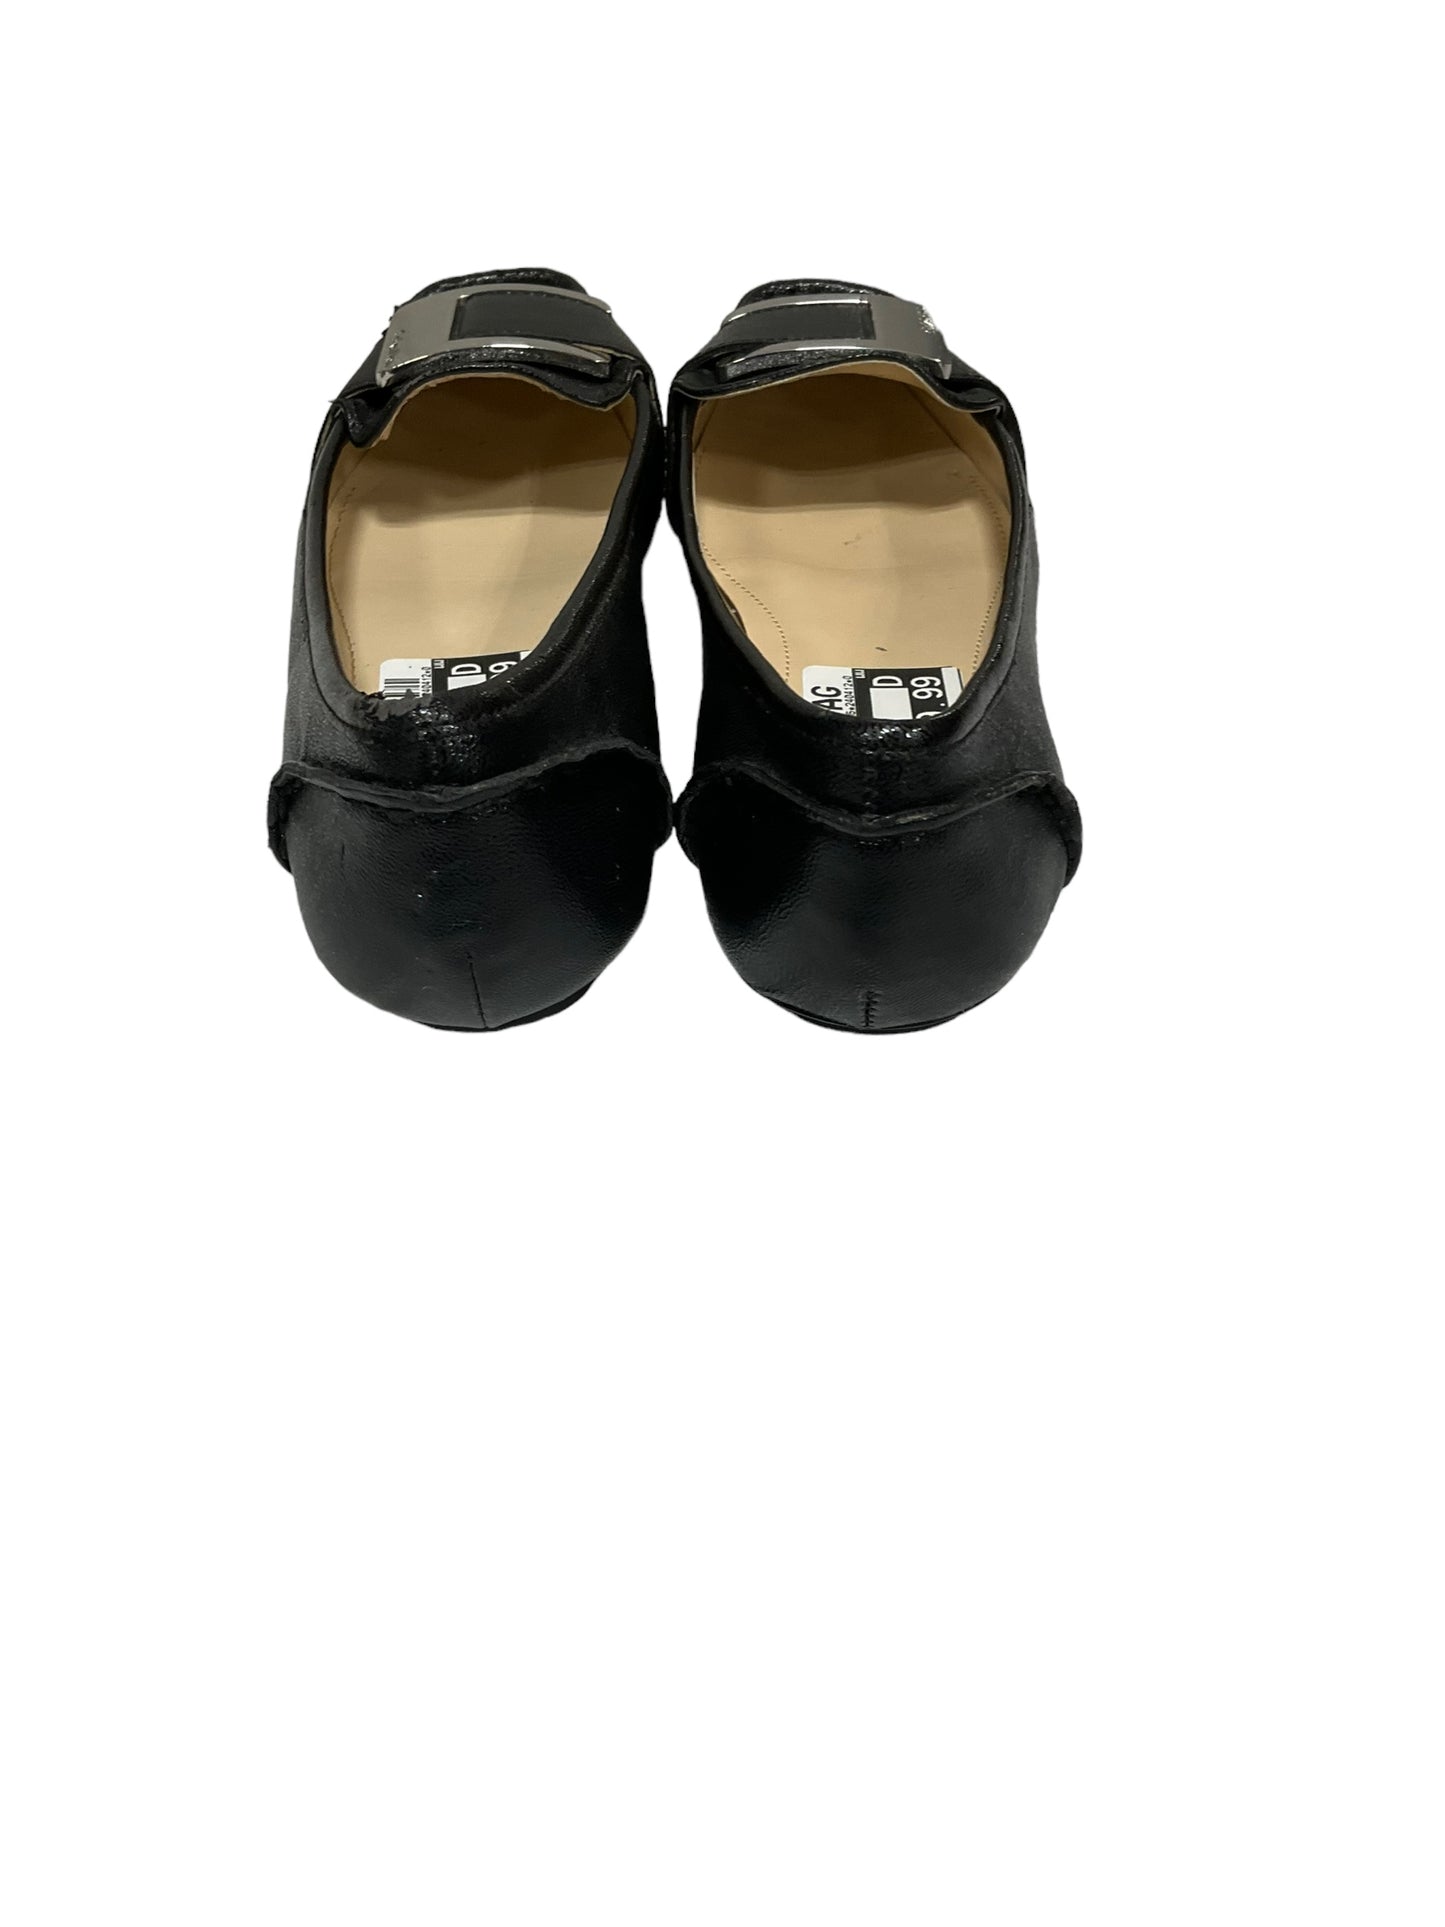 Shoes Flats By Calvin Klein  Size: 6